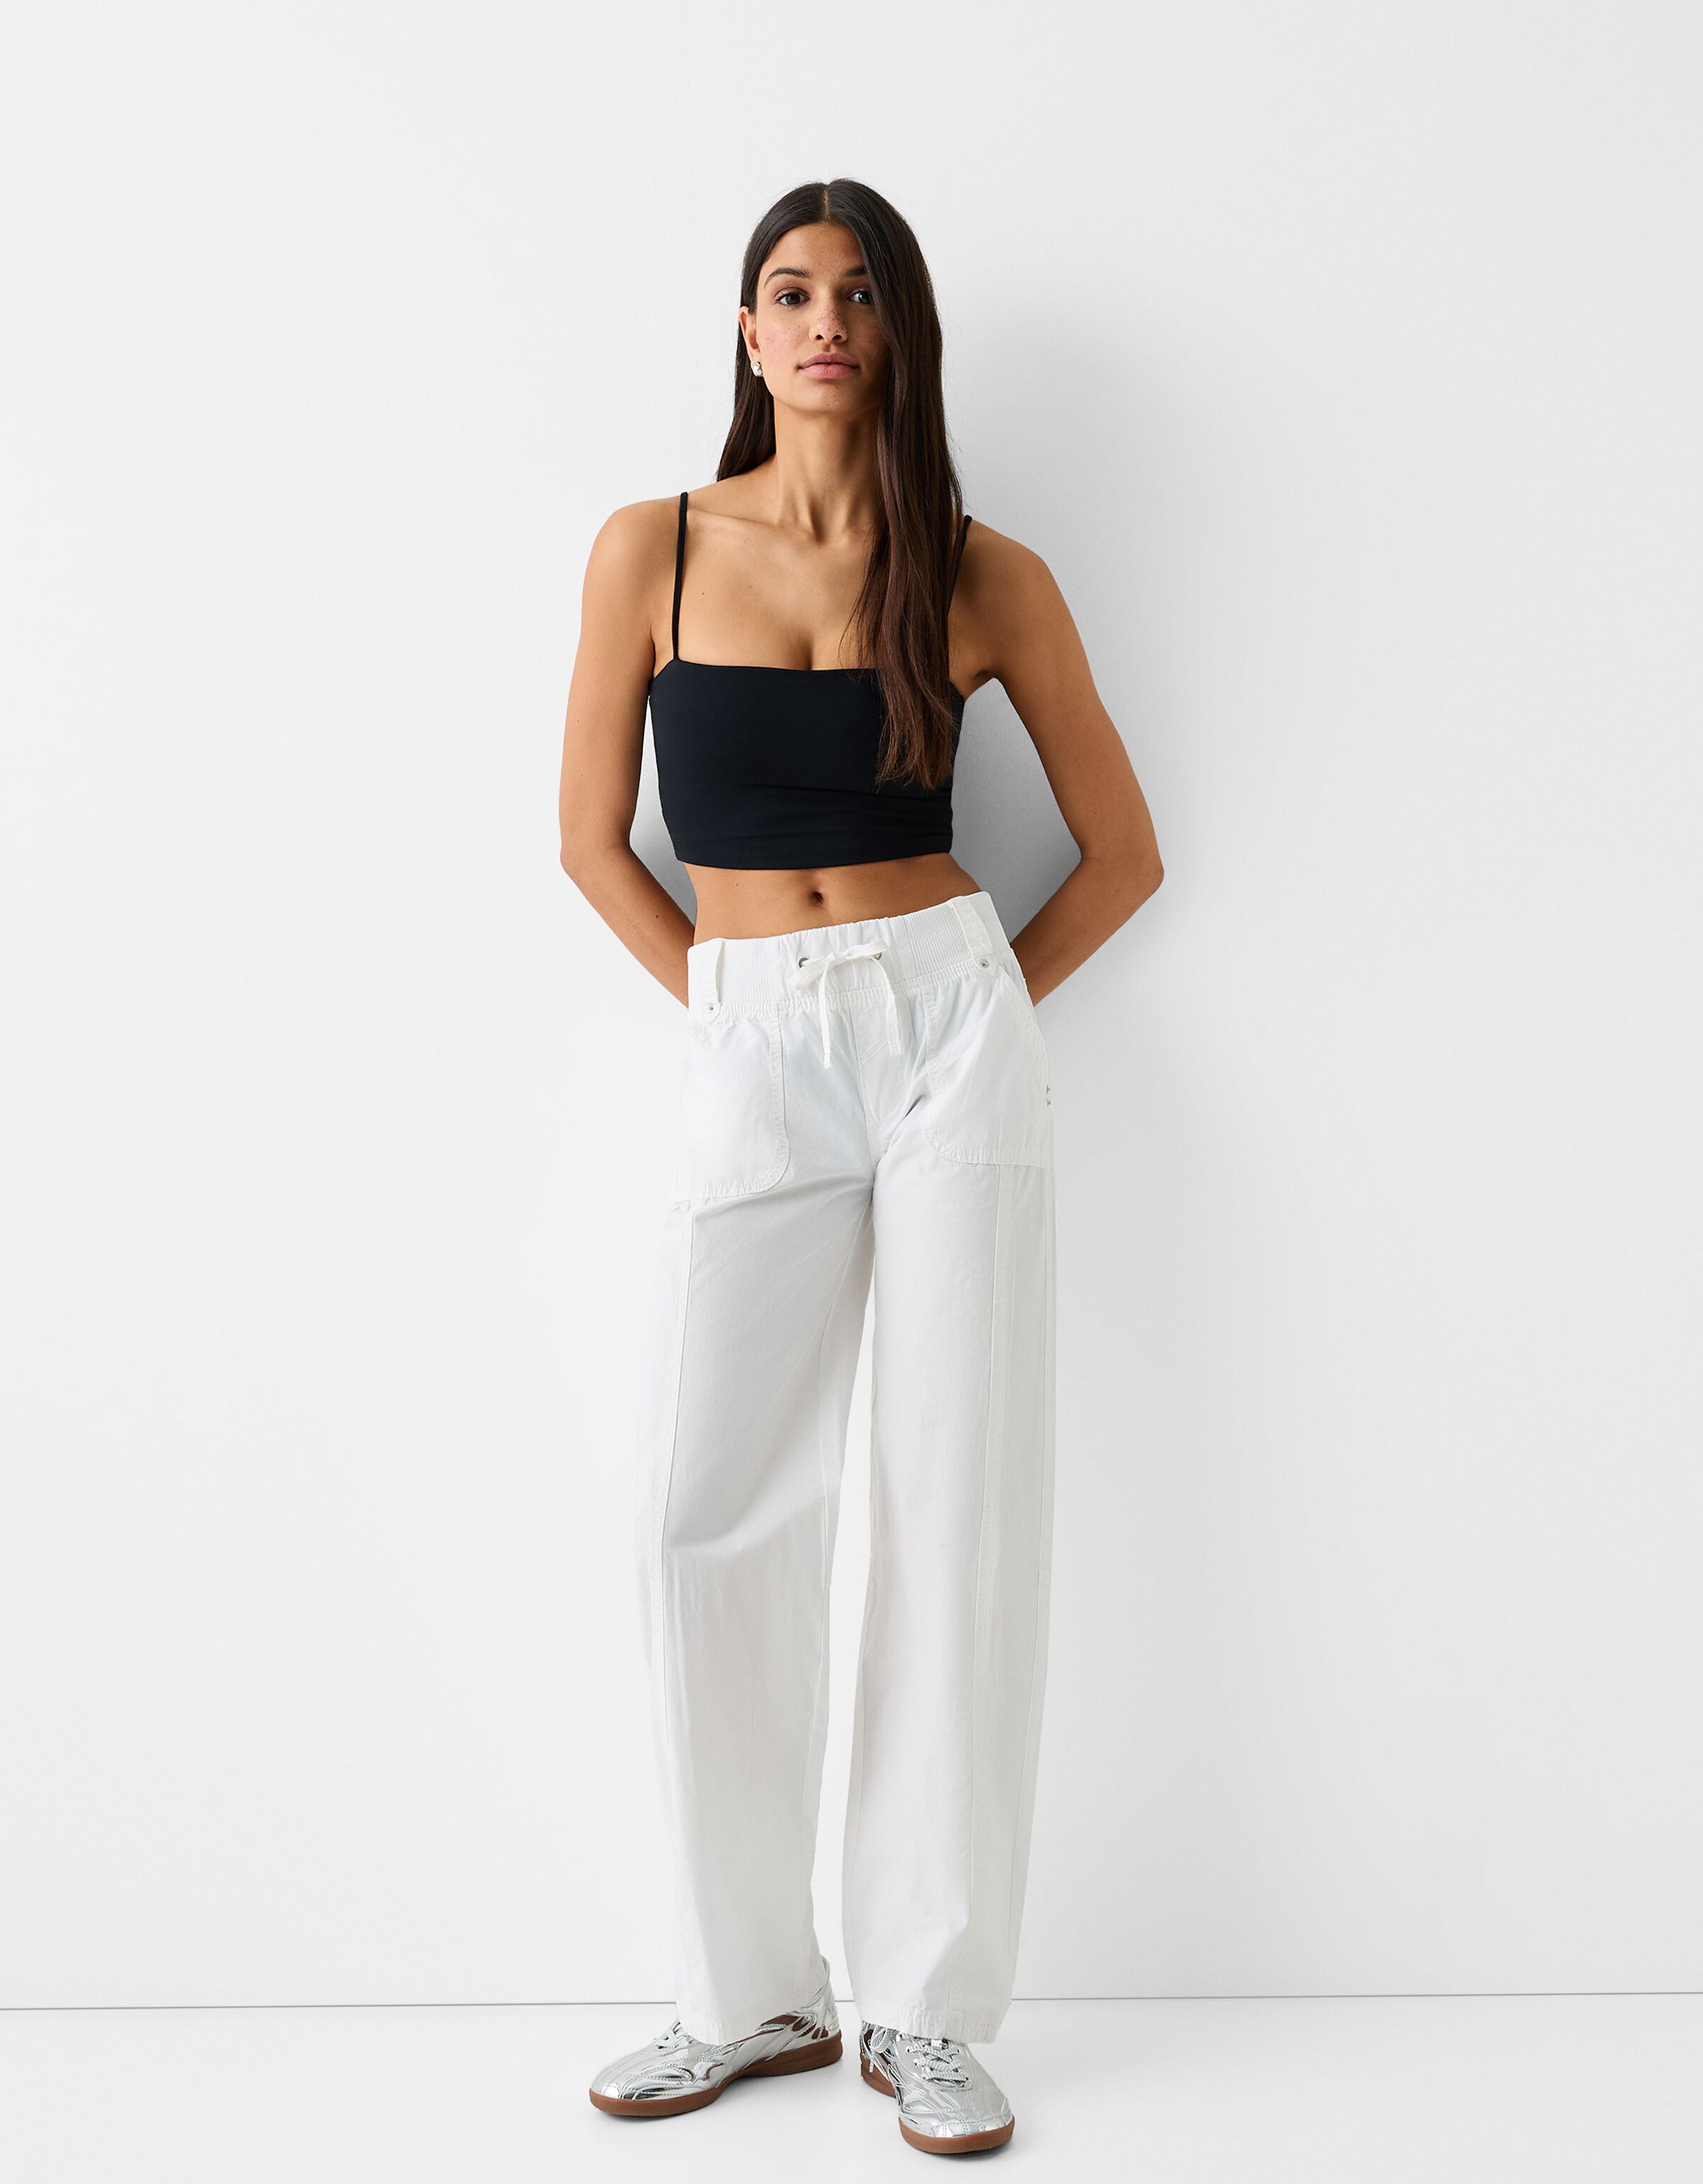 Buy Black White Stripe Palazzo Pant with Belt Handloom Cotton Block Print  Shorts for Best Price, Reviews, Free Shipping